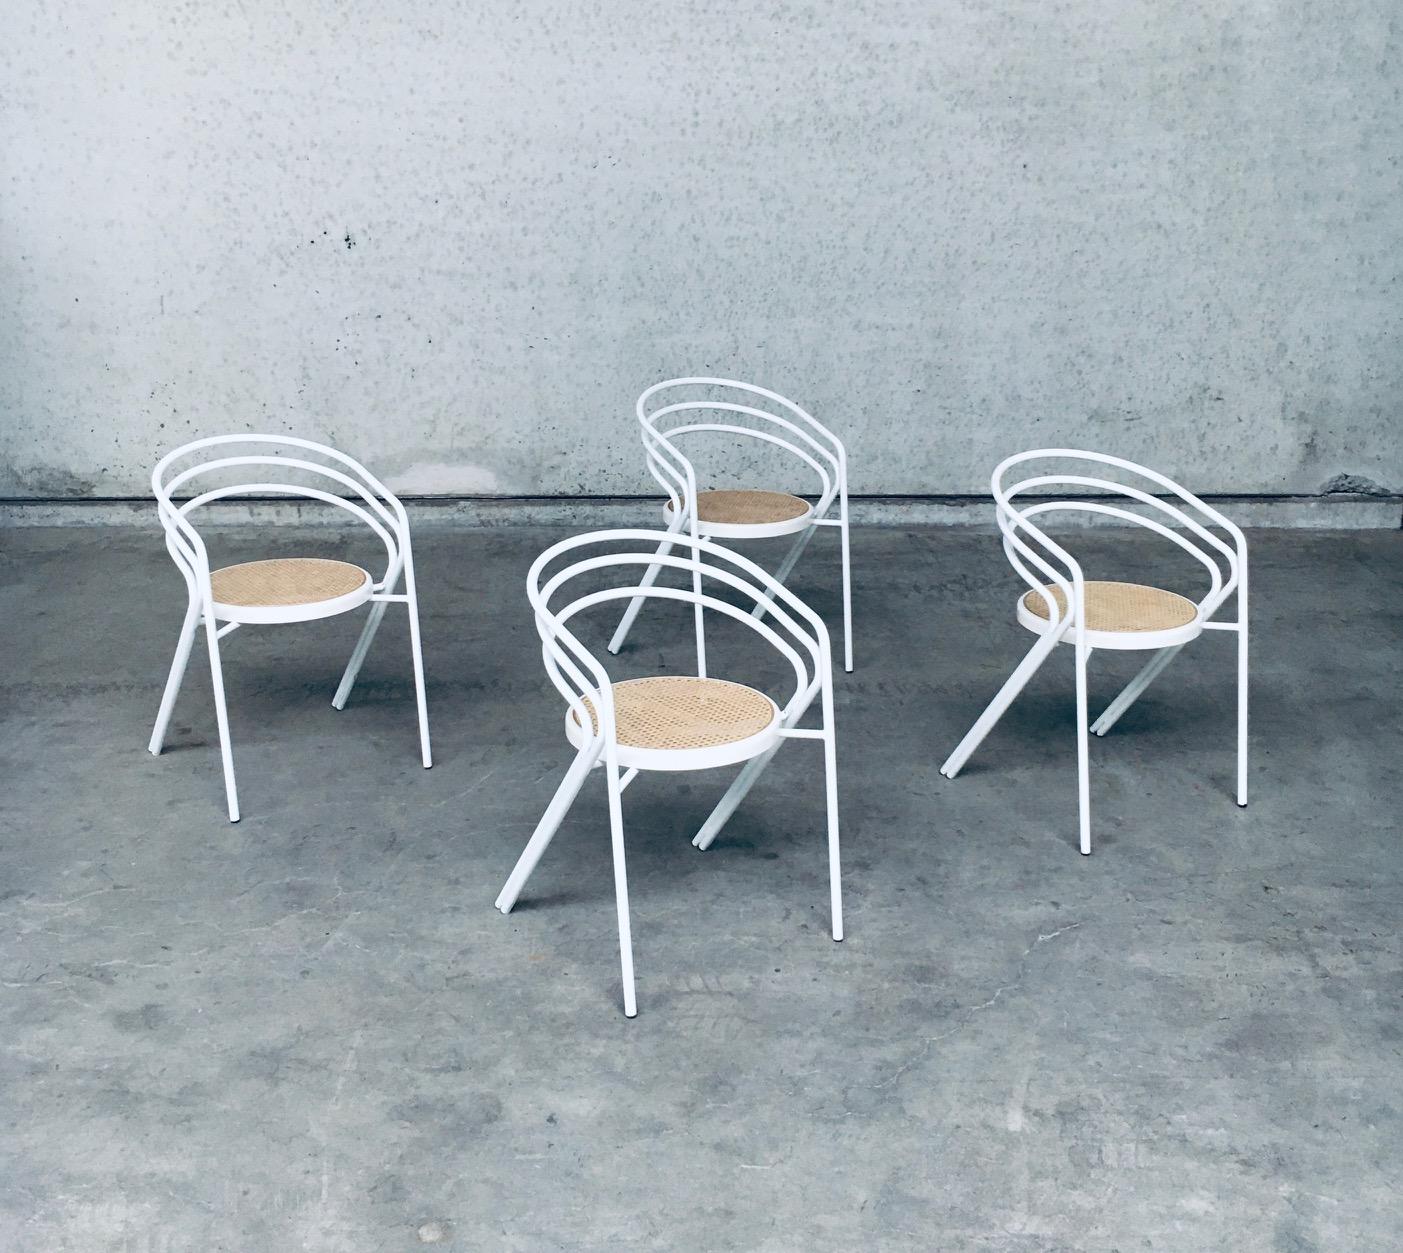 Vintage Italian Design white metal and webbing chair set of 4. Made in Italy, 1970's. No maker markings on these wonderfull airy and well designed kitchen, dining or side chairs. White coated metal frame with webbing seats. These come in very good